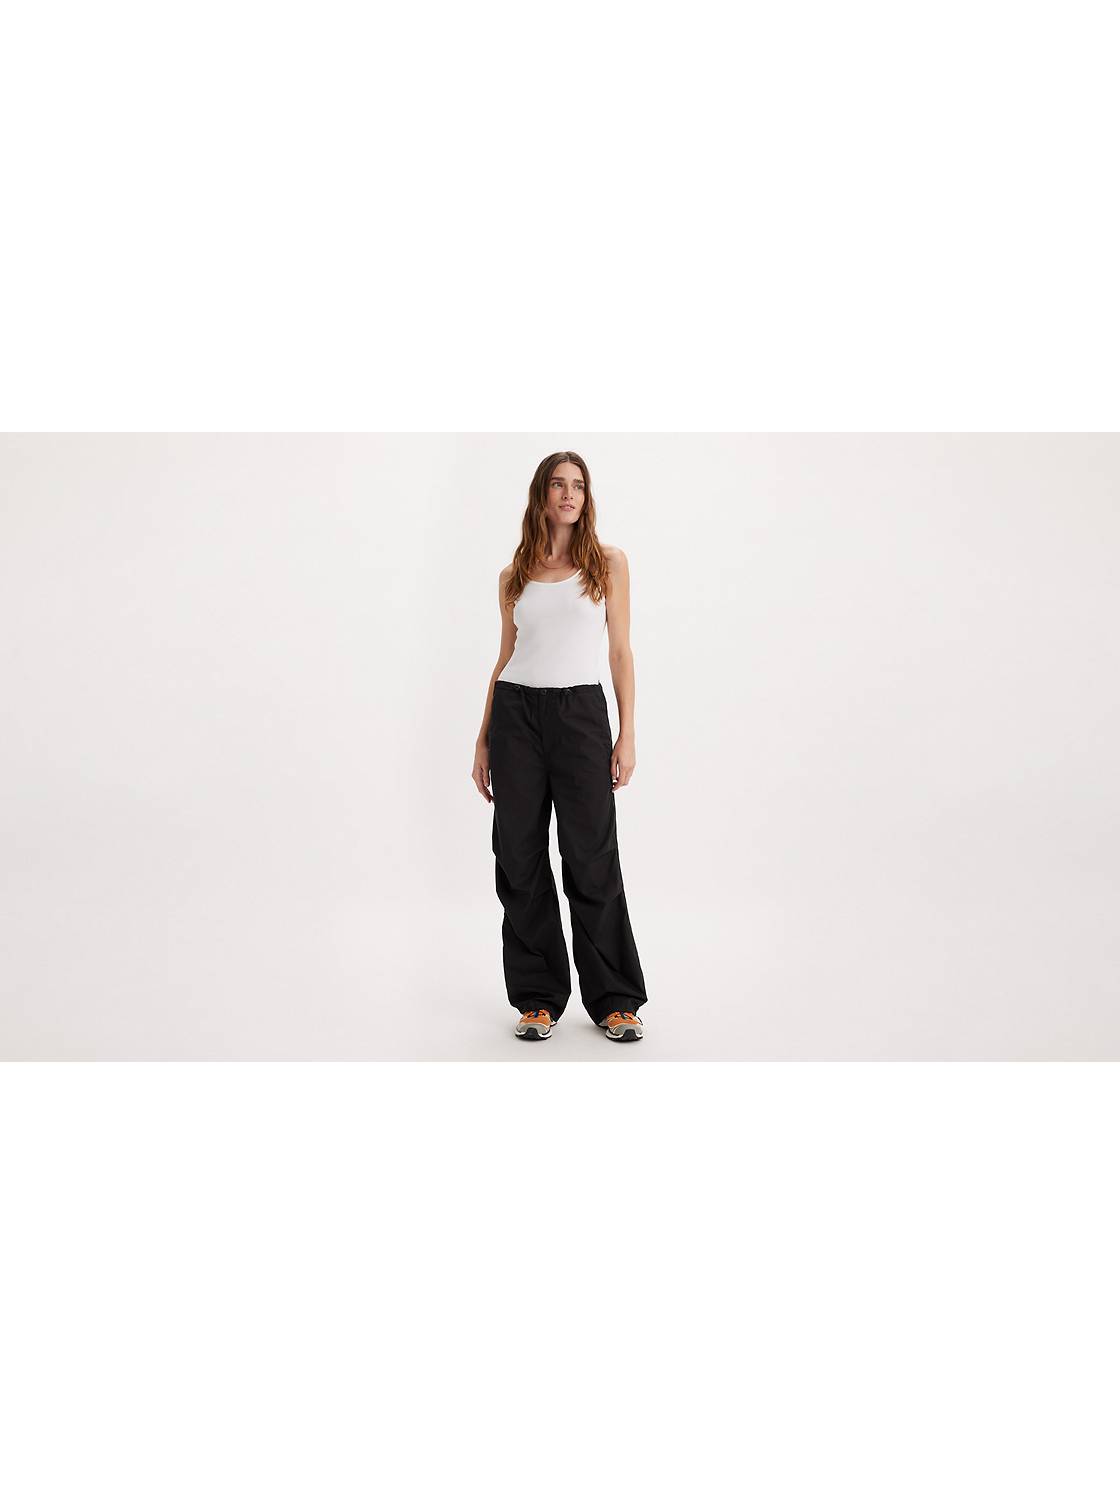 Women's 100% Cotton Summer Trousers Sleeping Pants Large Size